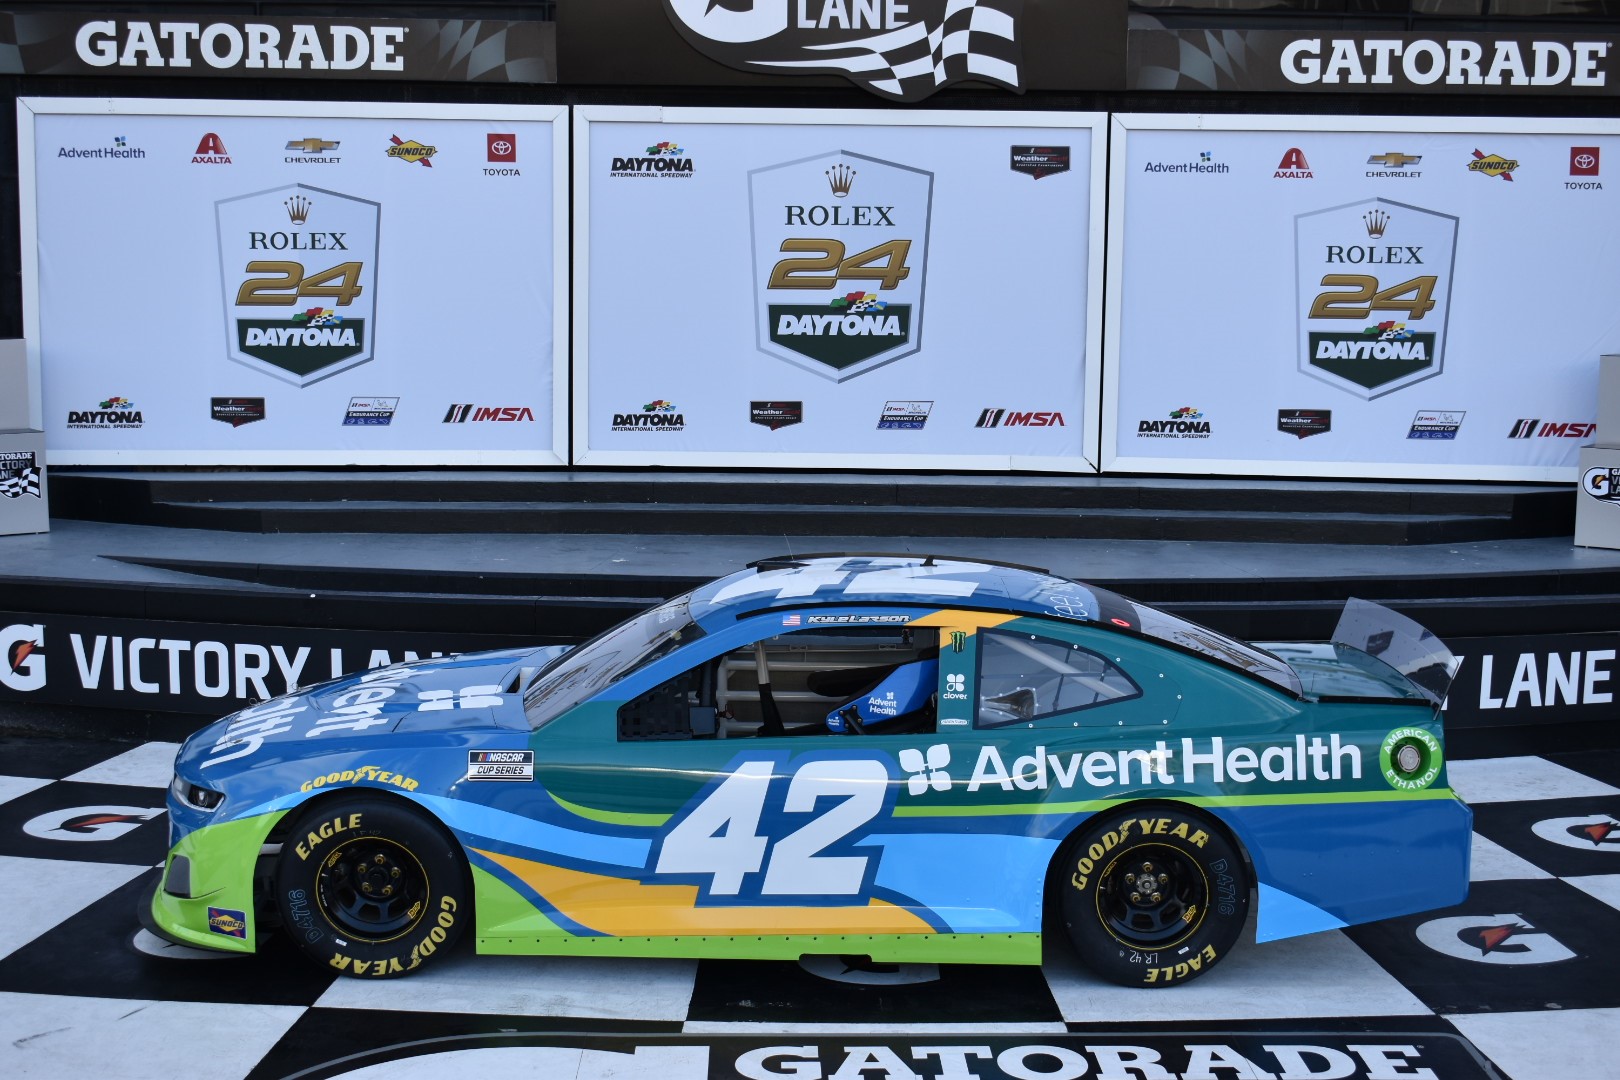 During the 2020 season, Kyle Larson will pilot the No. 42 AdventHealth Chevrolet Camaro ZL1 1LE for the Clash at Daytona, as well as the NASCAR Cup Series playoff race at Kansas Speedway in the fall.